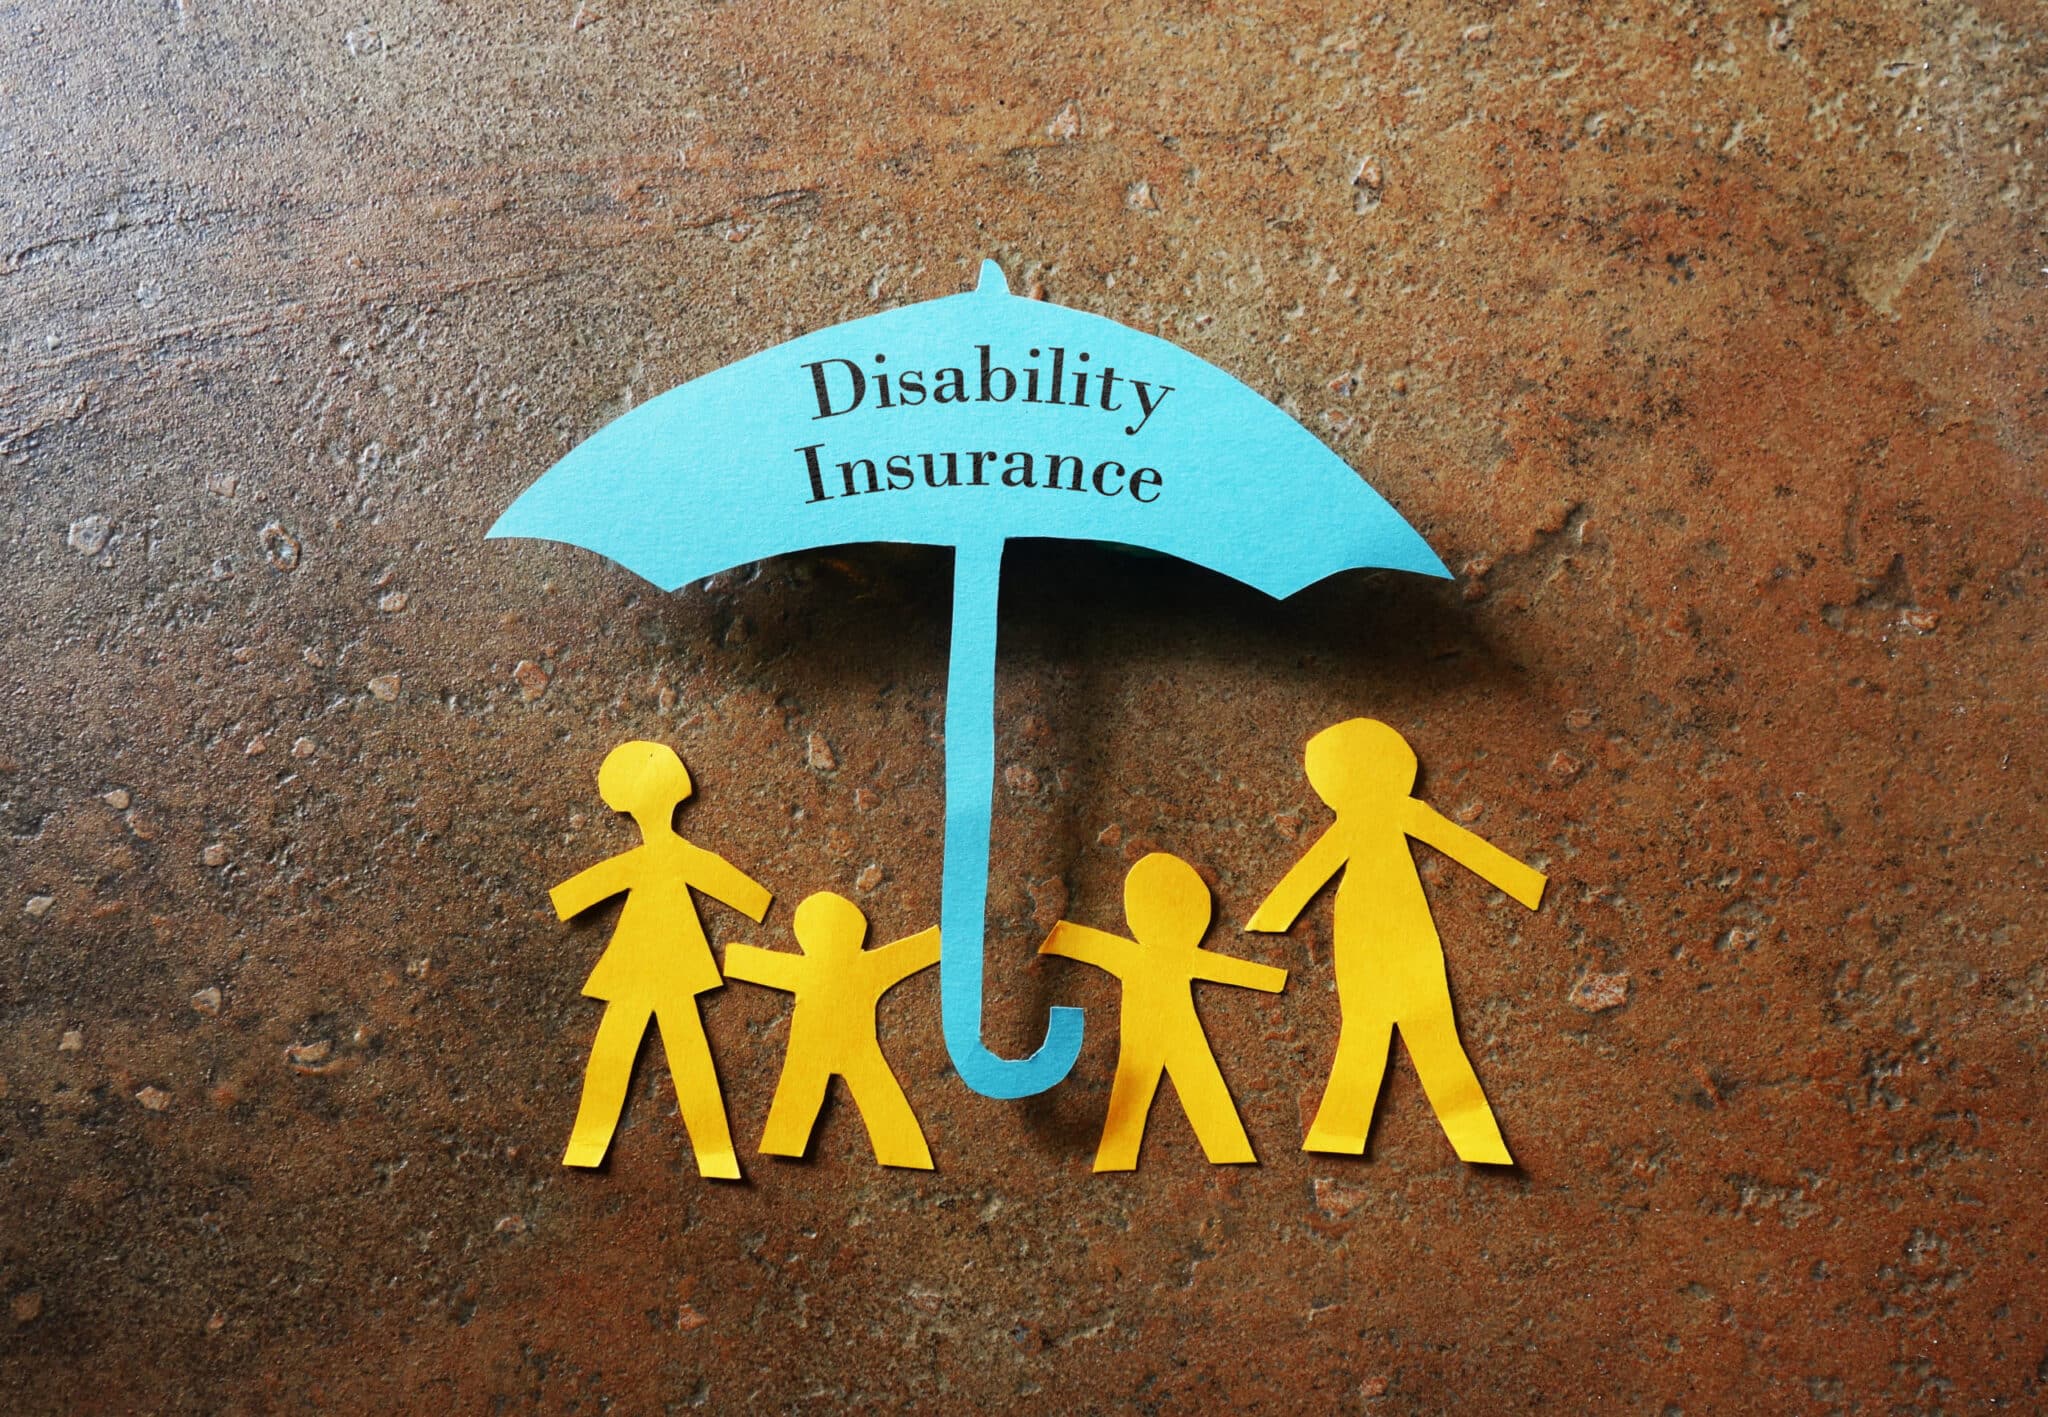 Why is Disability Insurance Important - Disability Insurance